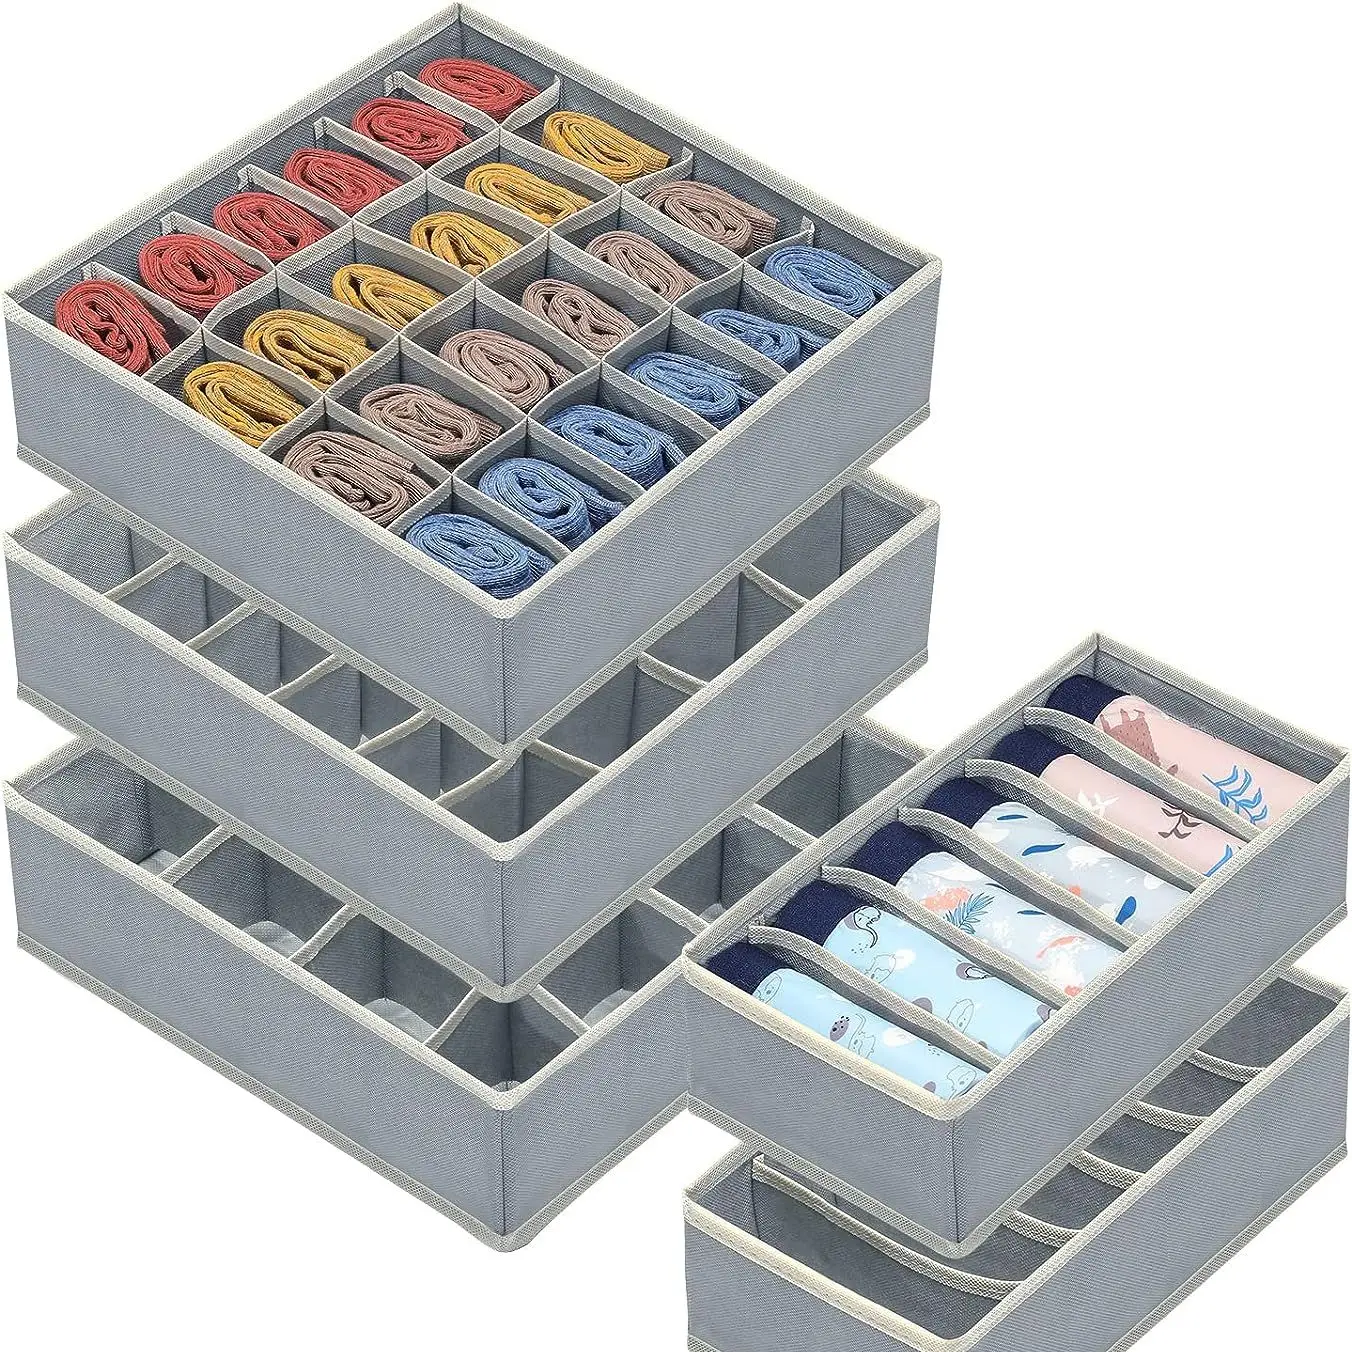 Petals petals drawer organizers for clothing - 8 pack foldable